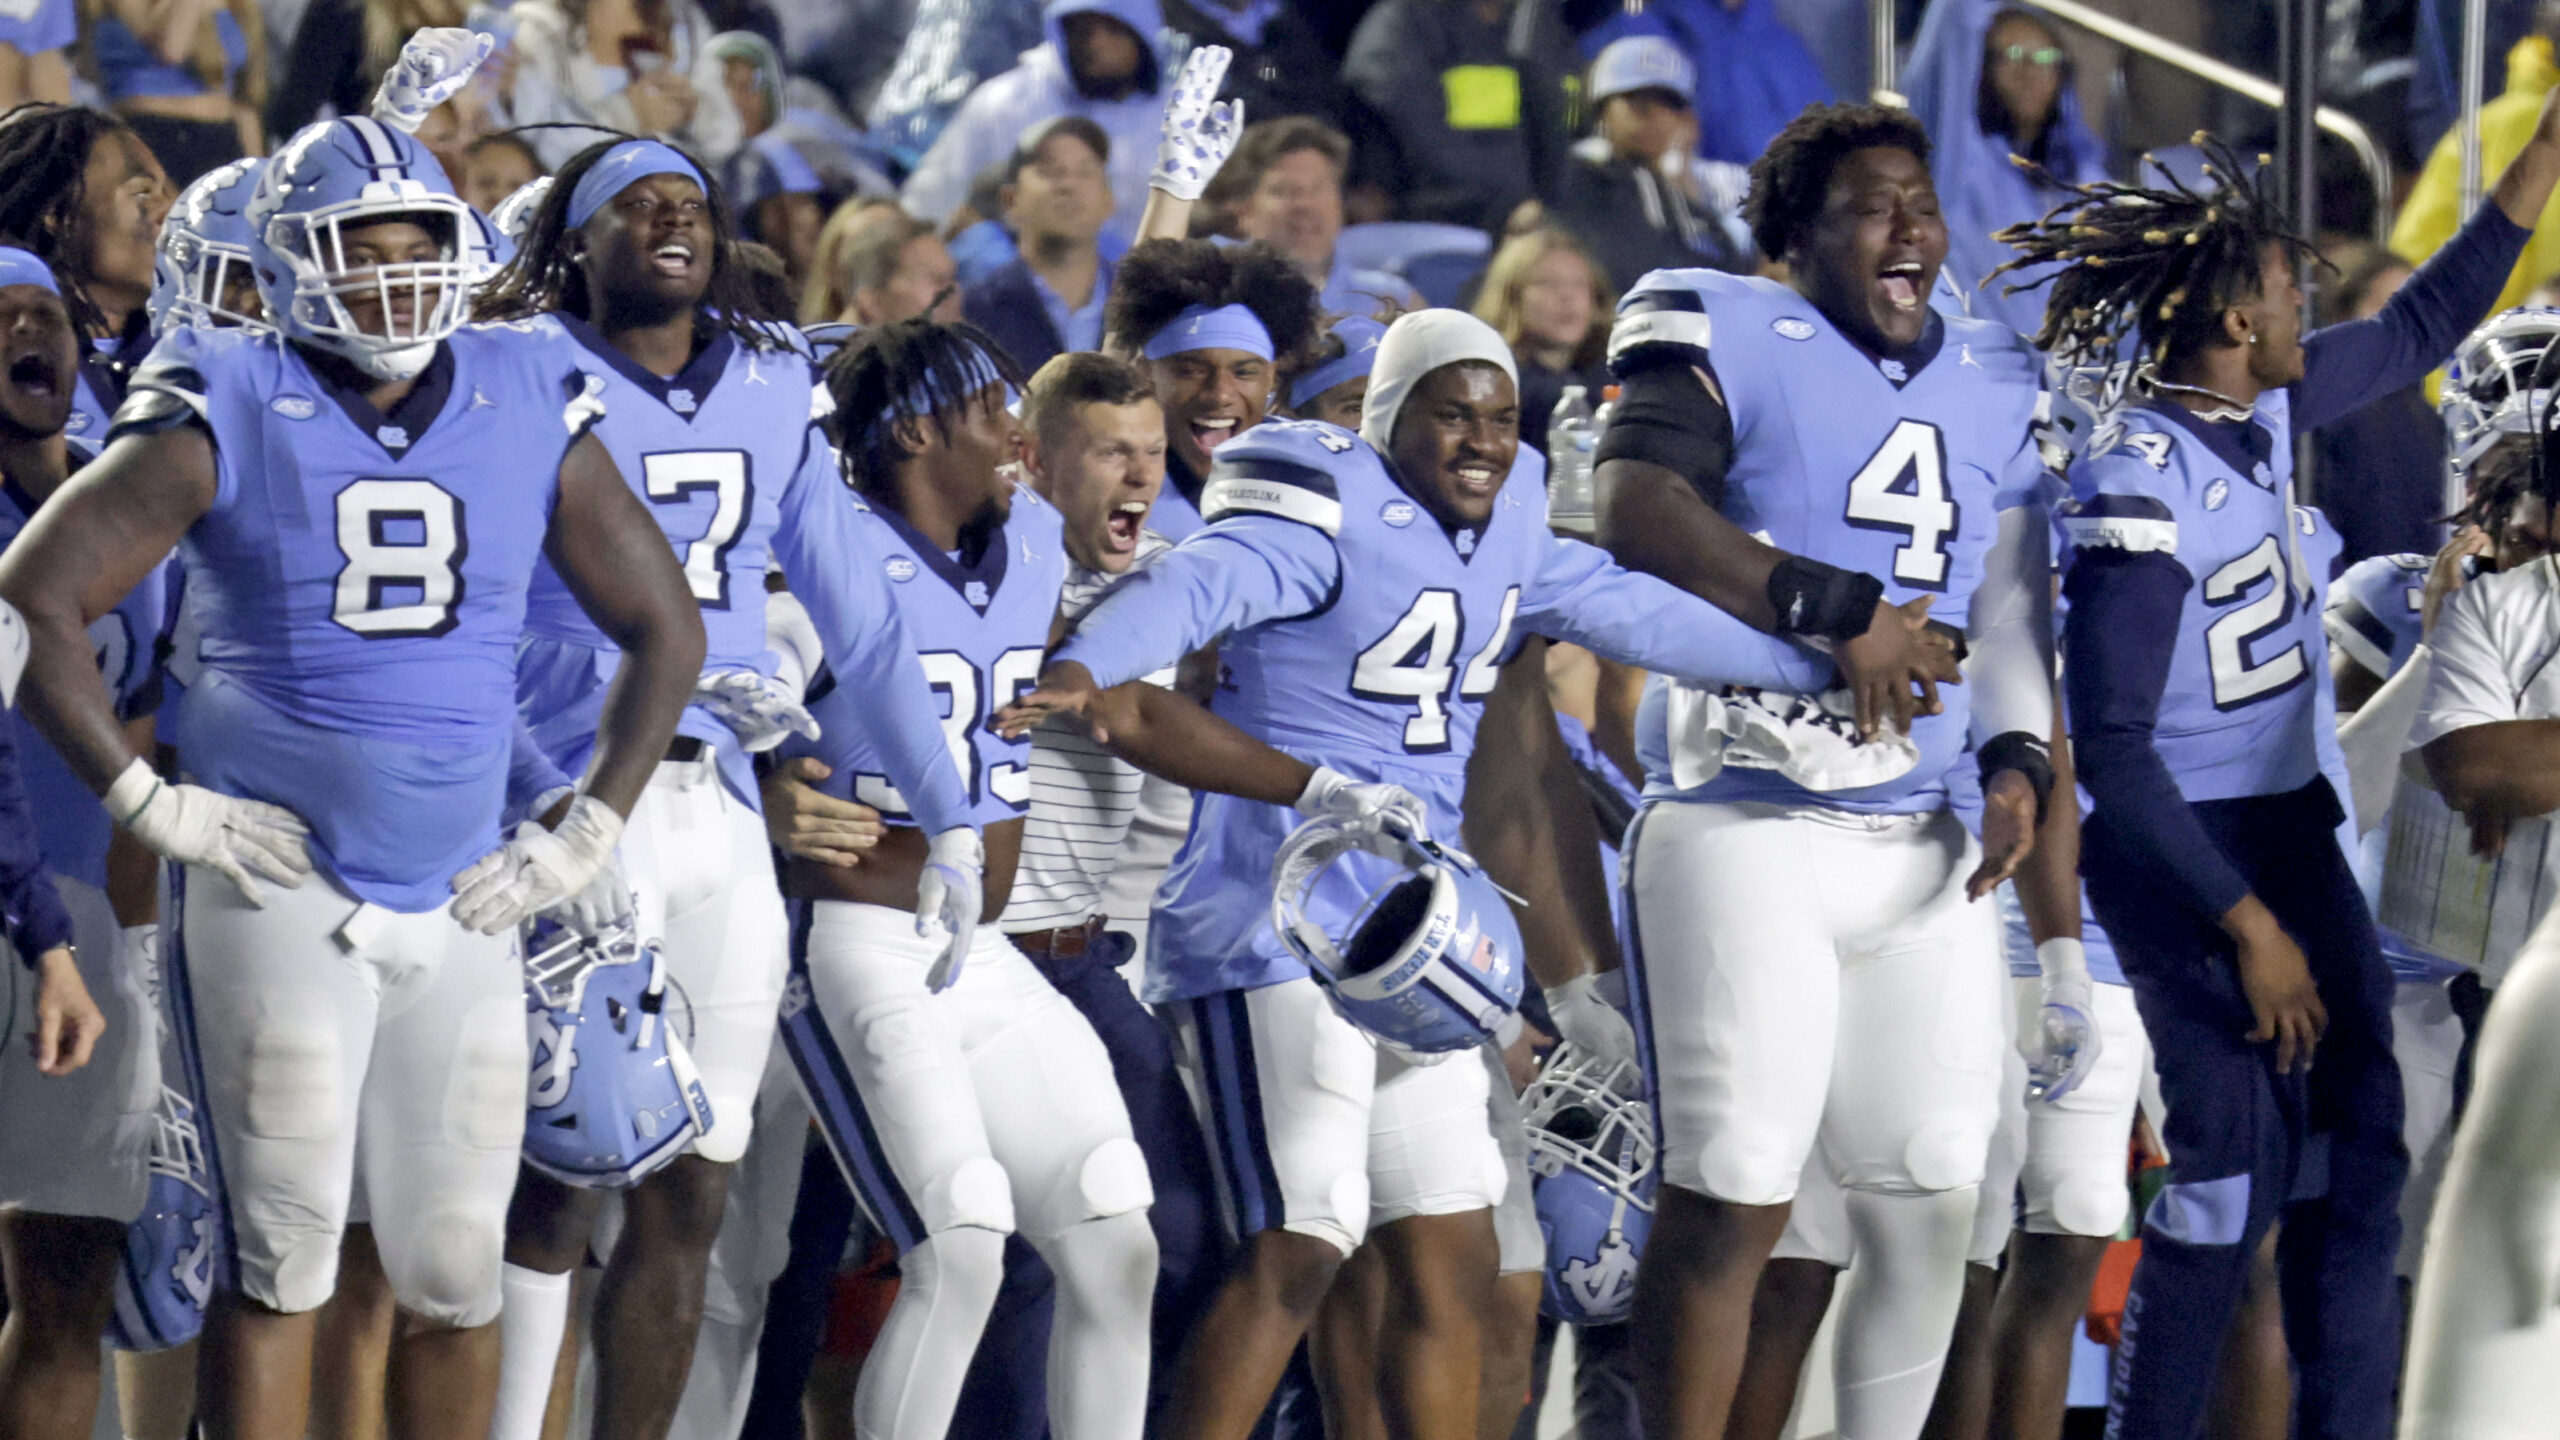 UNC Football vs. Virginia: How to Watch, Streaming Options, Kickoff Time